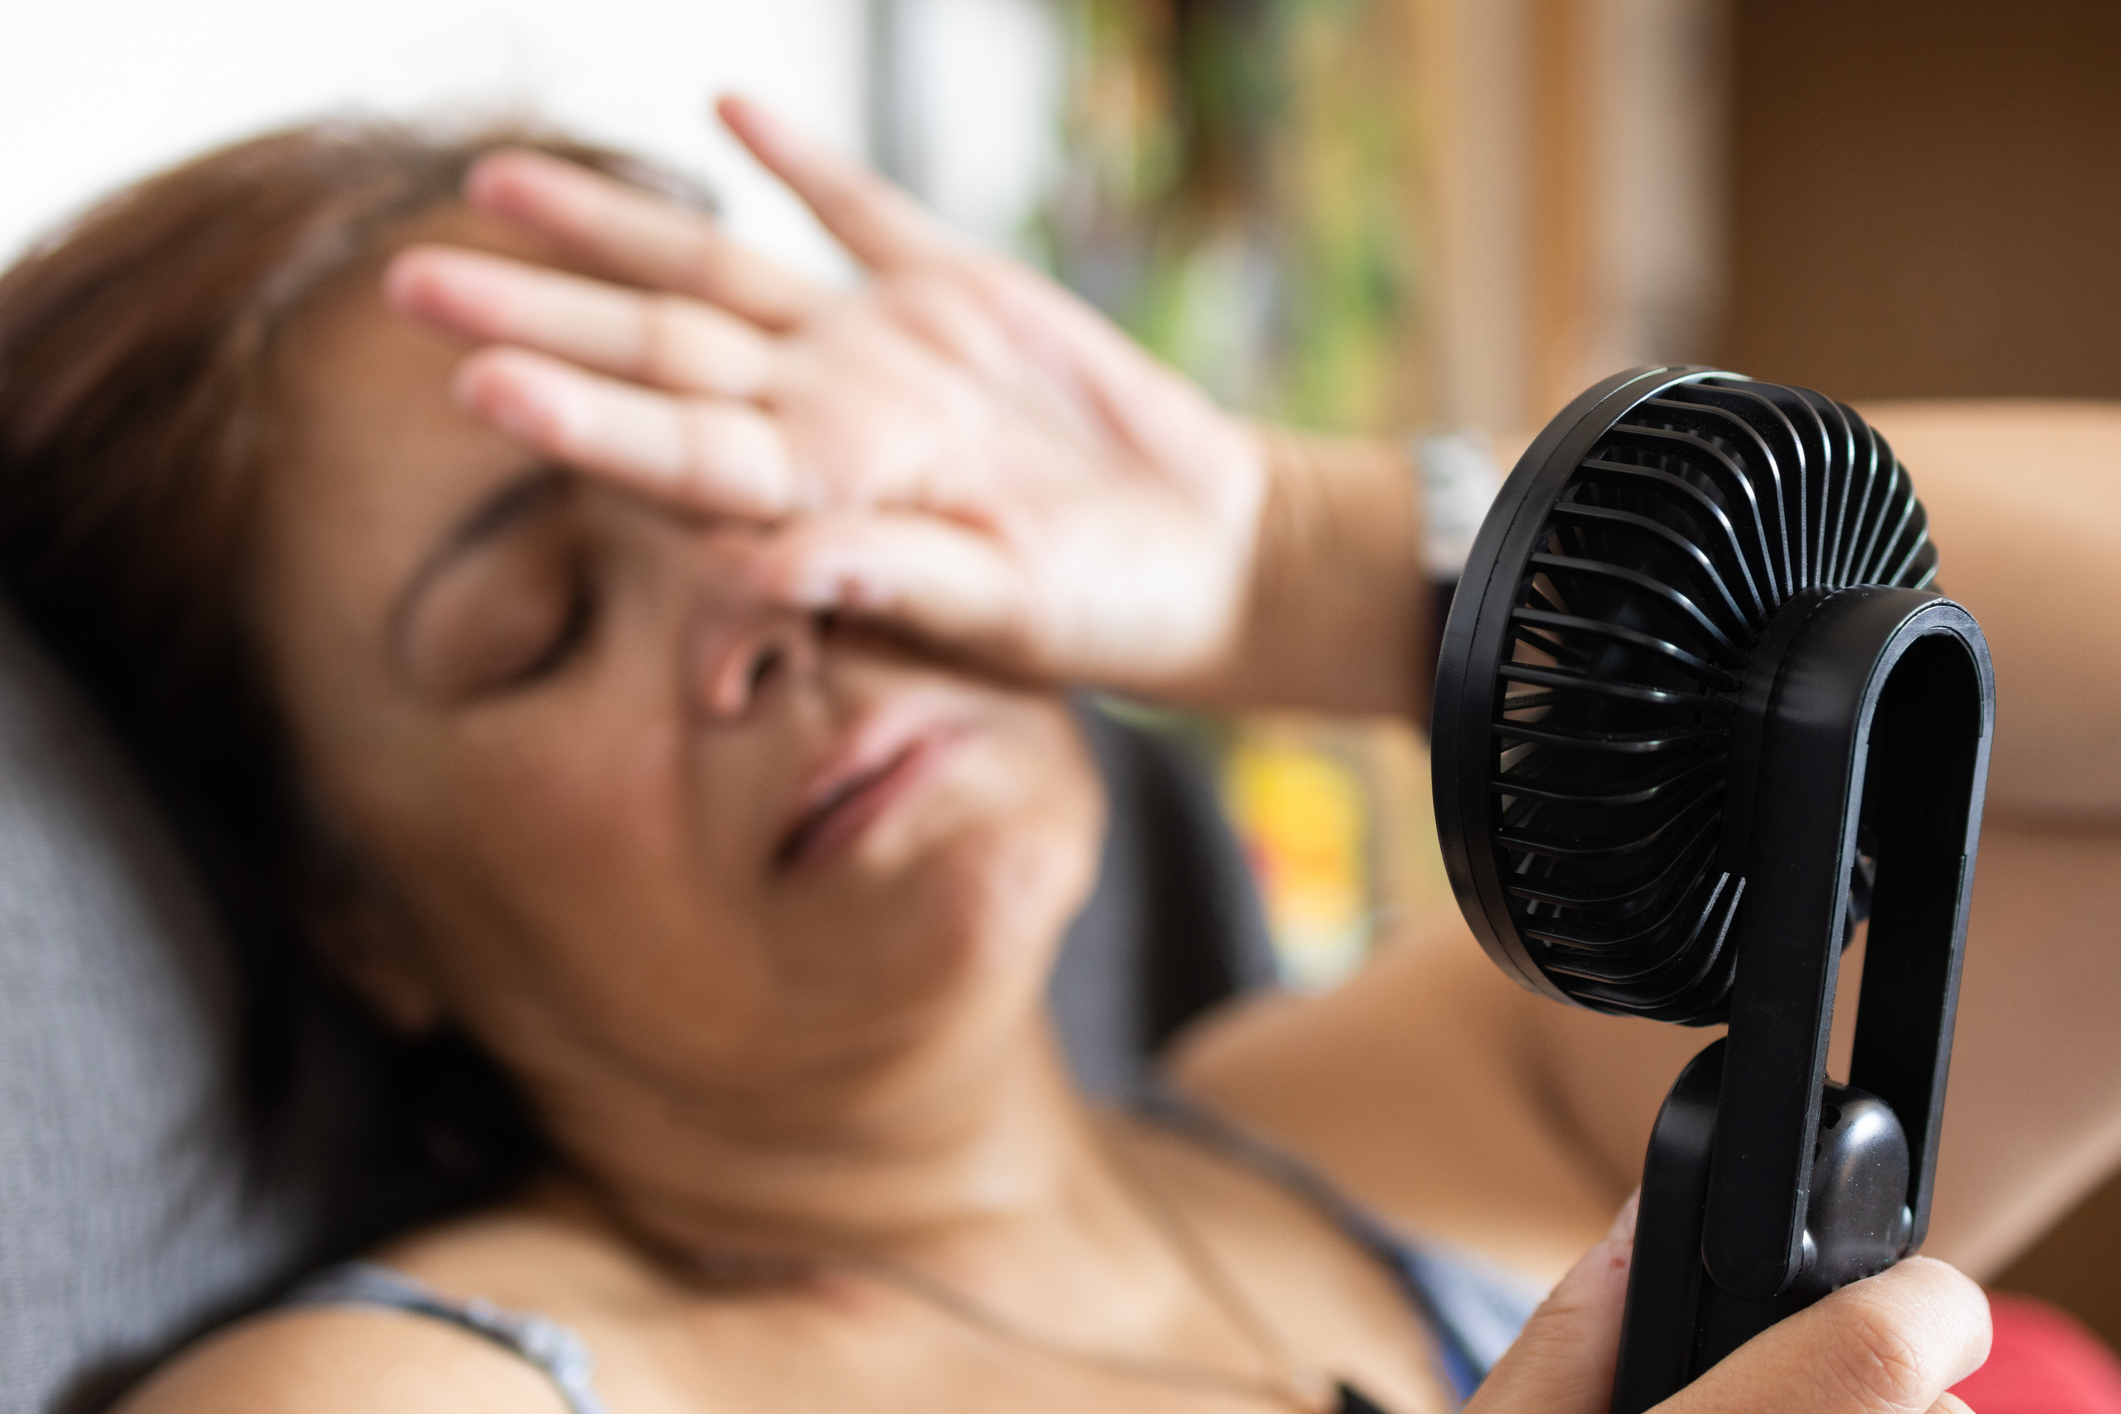 Nighttime heat: The stroke risk we didn’t know about